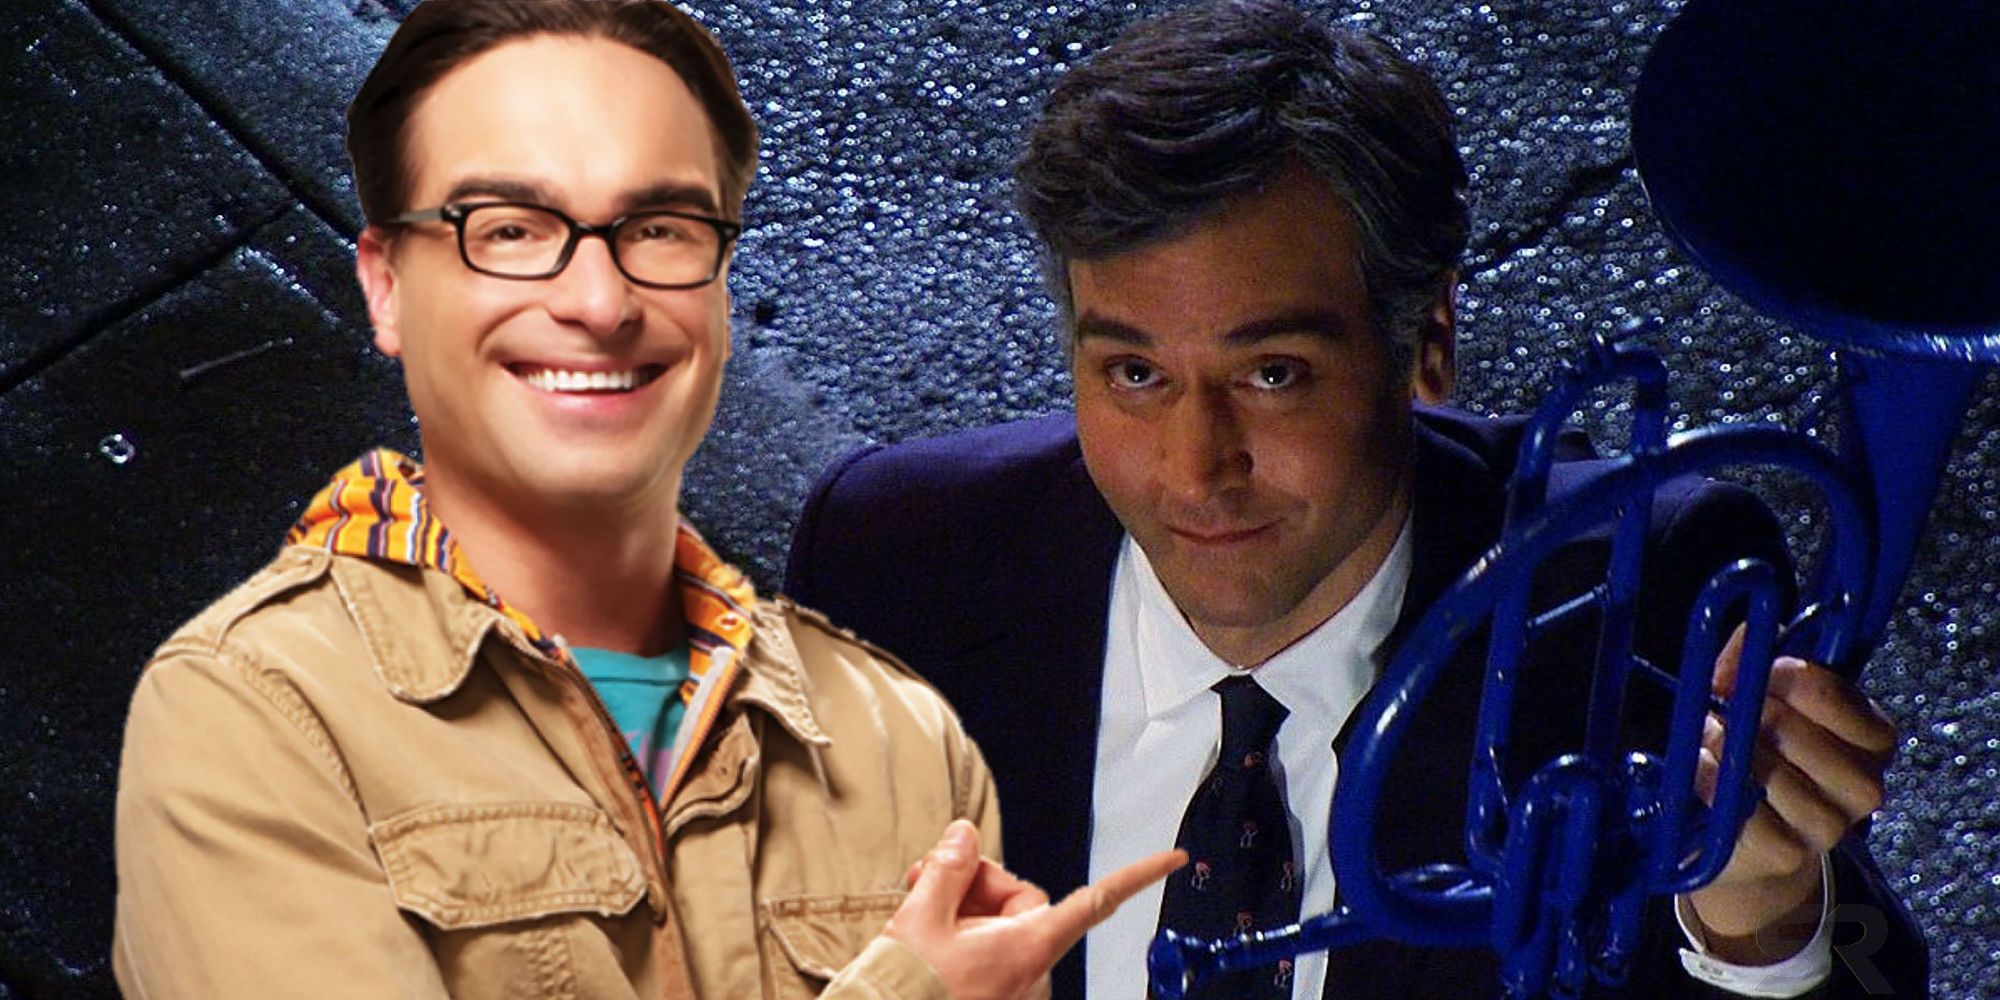 Leonard in The Big Bang Theory and Ted in How I Met Your Mother